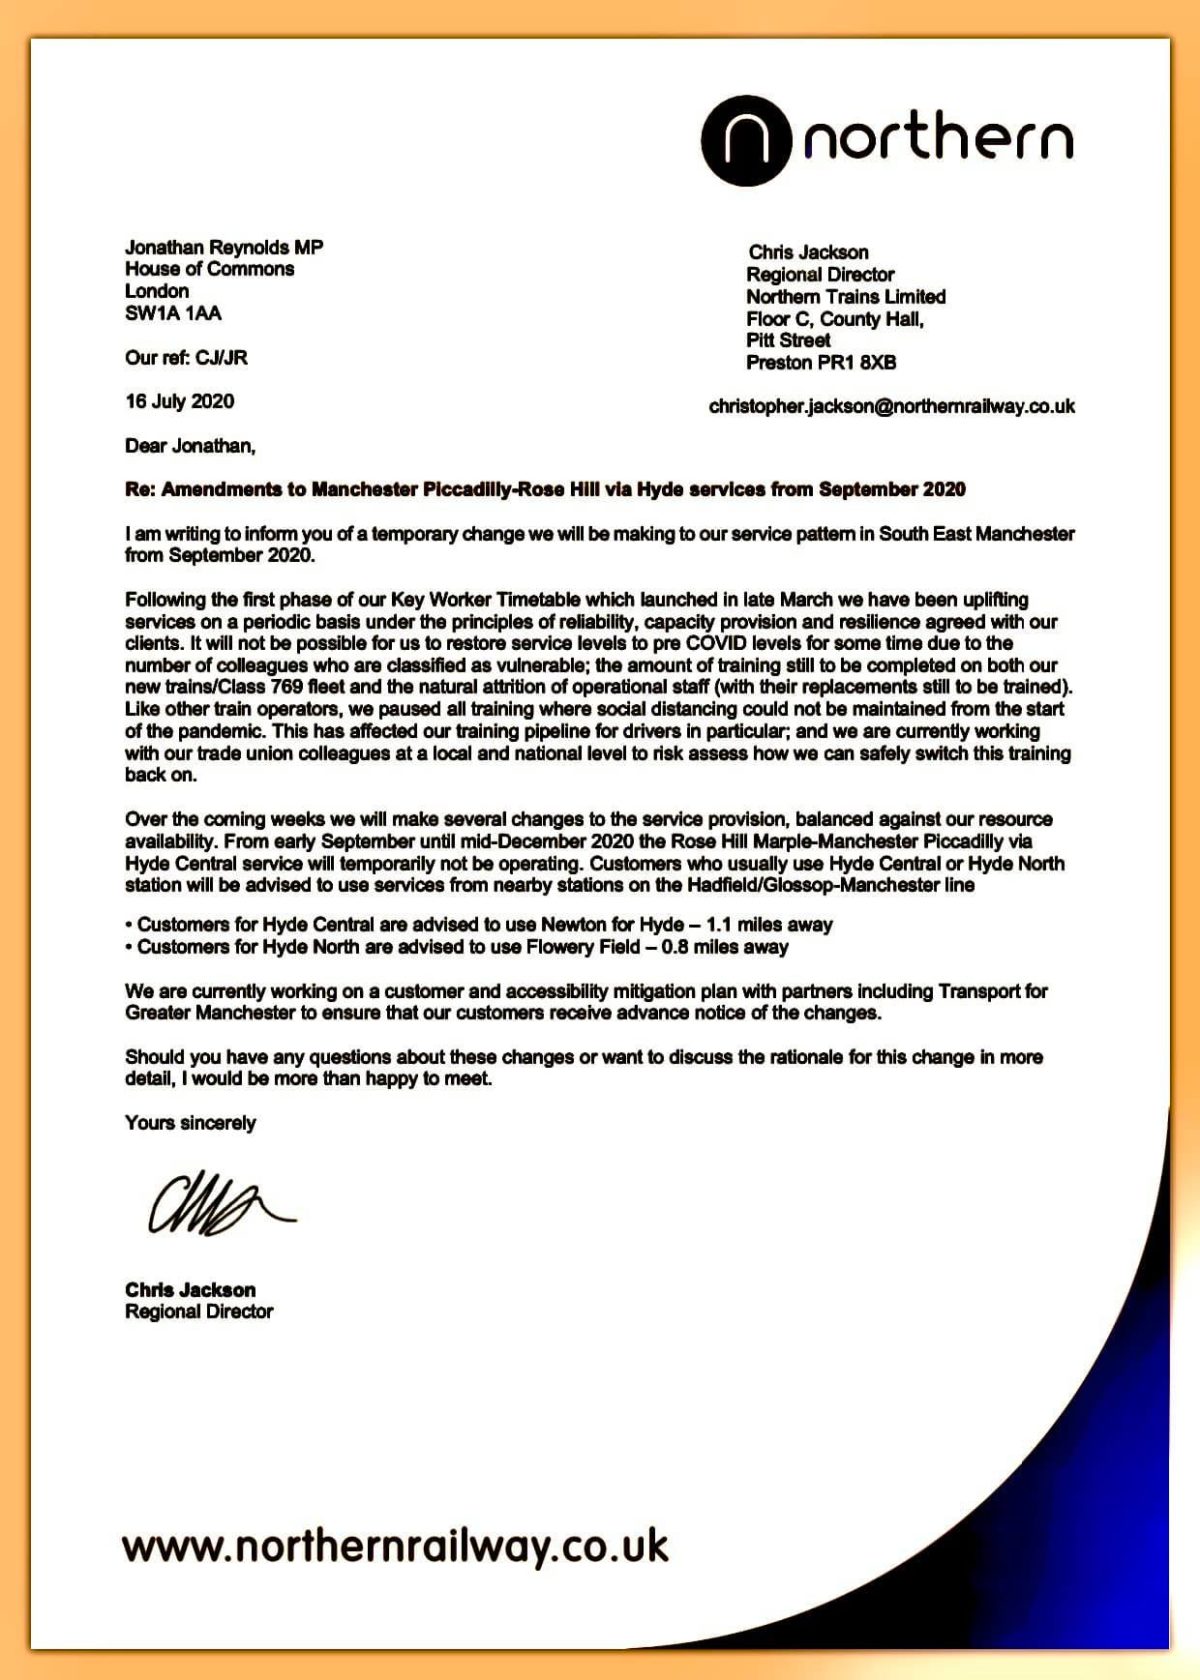 The letter received from Northern about the planned suspension of the Hyde/Rose Hill line